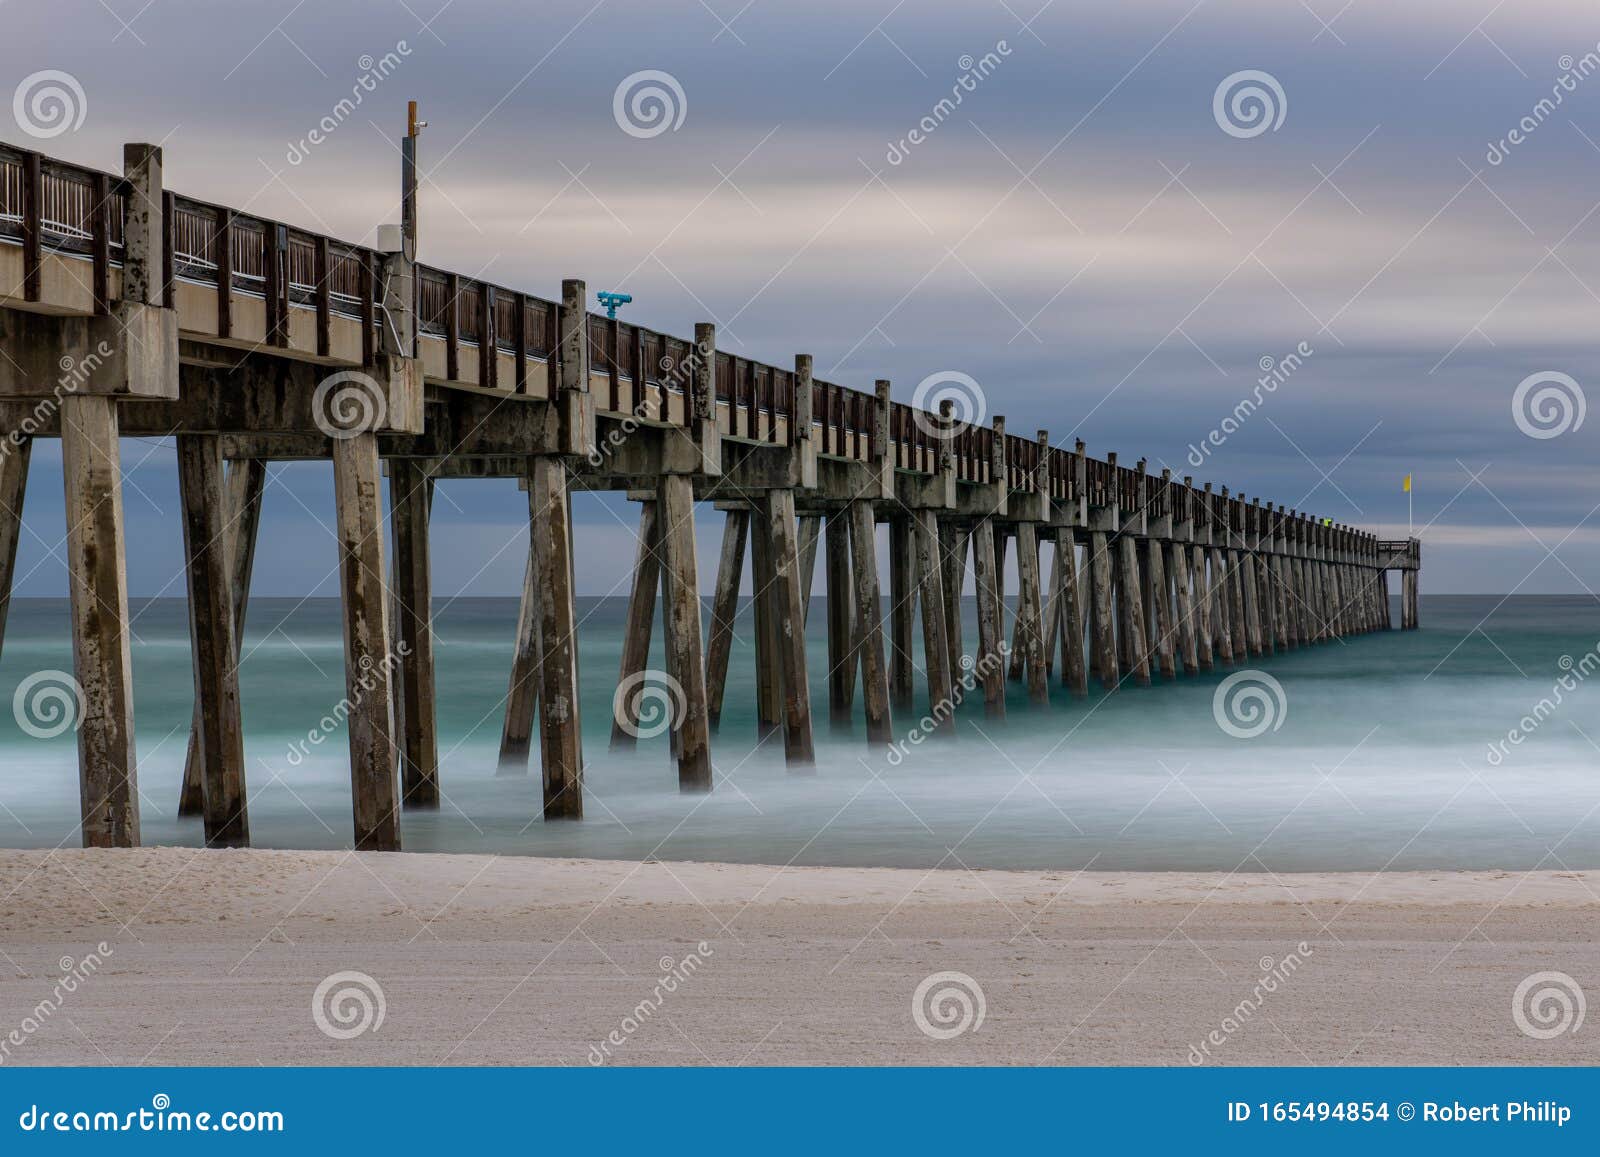 the pensacola beach pier in the morning looking out on the gulf of mexico